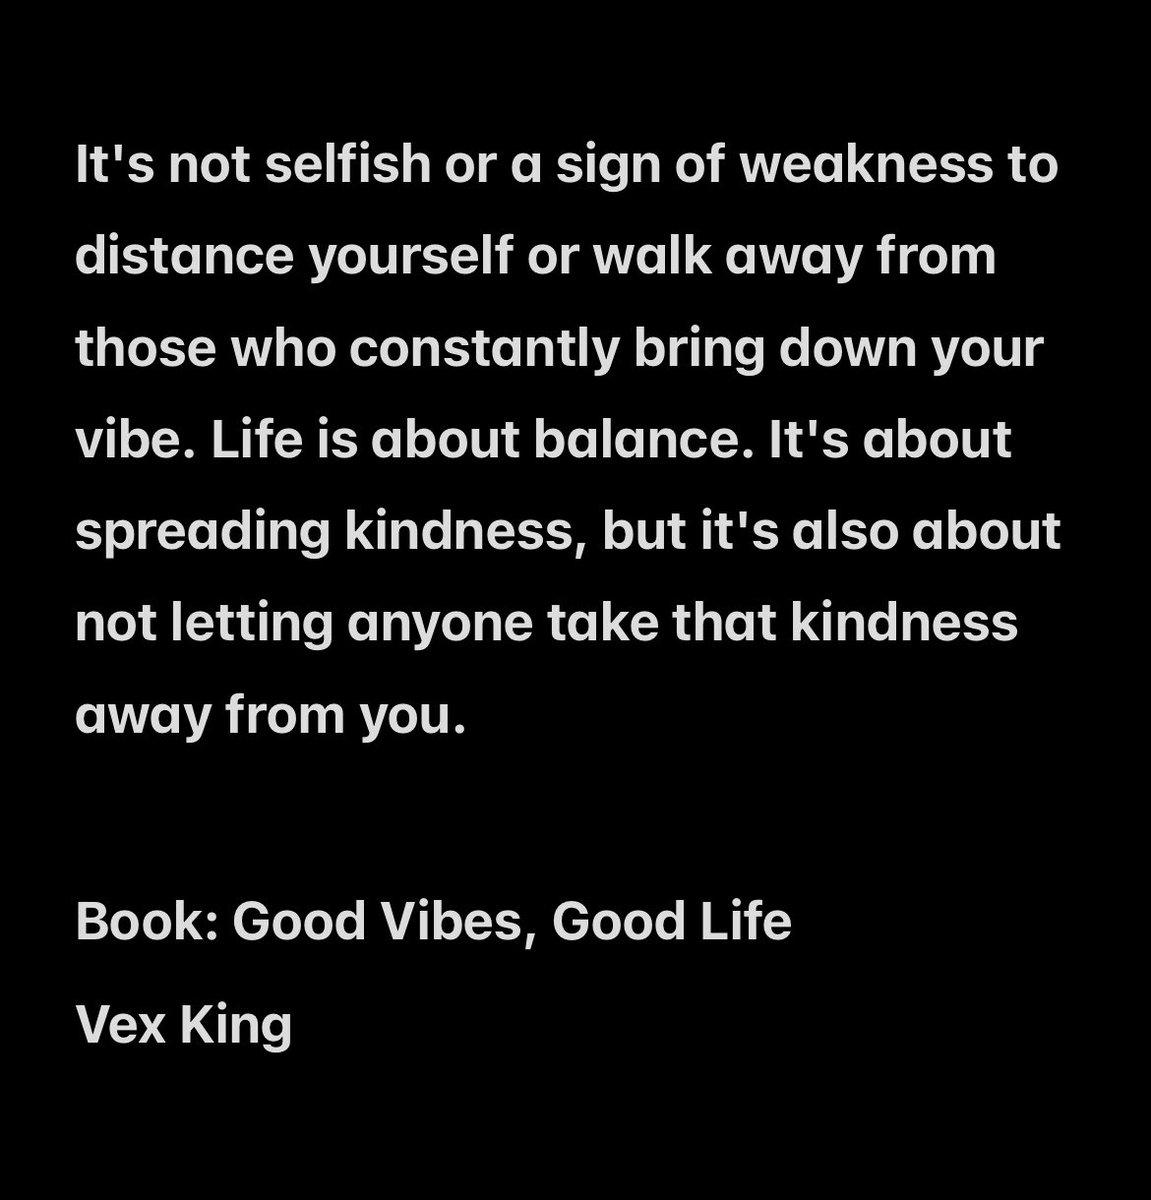 #vexwwksingbook #goodvibesgoodlife #books #readingtime #reading #library #wisdom #learning #knowledge #selfish #weakness #distance #yourself #Life #balance #spreading #kindness #Friday #morning #respectyourself